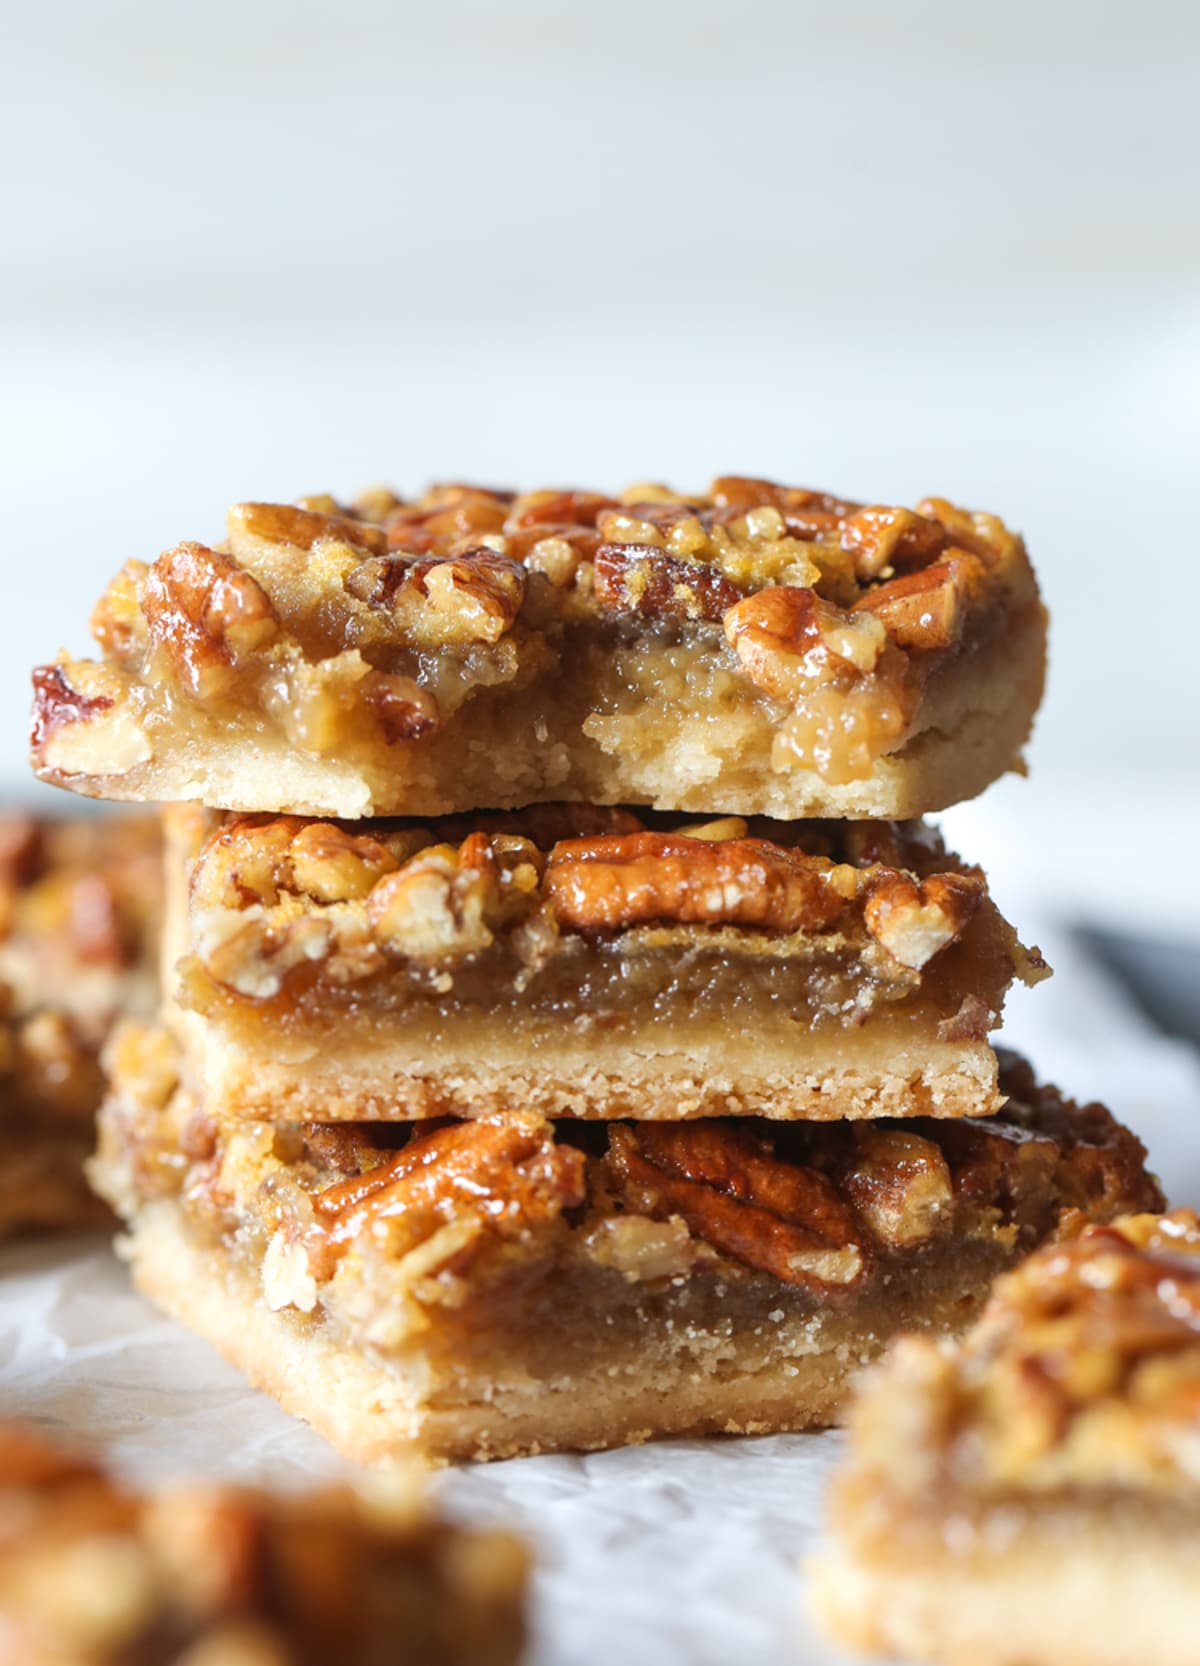 Three stacked Pecan Pie Bars showing the shortbread crust layer, the filling and nuts layers with a bite taken from the bar on top.